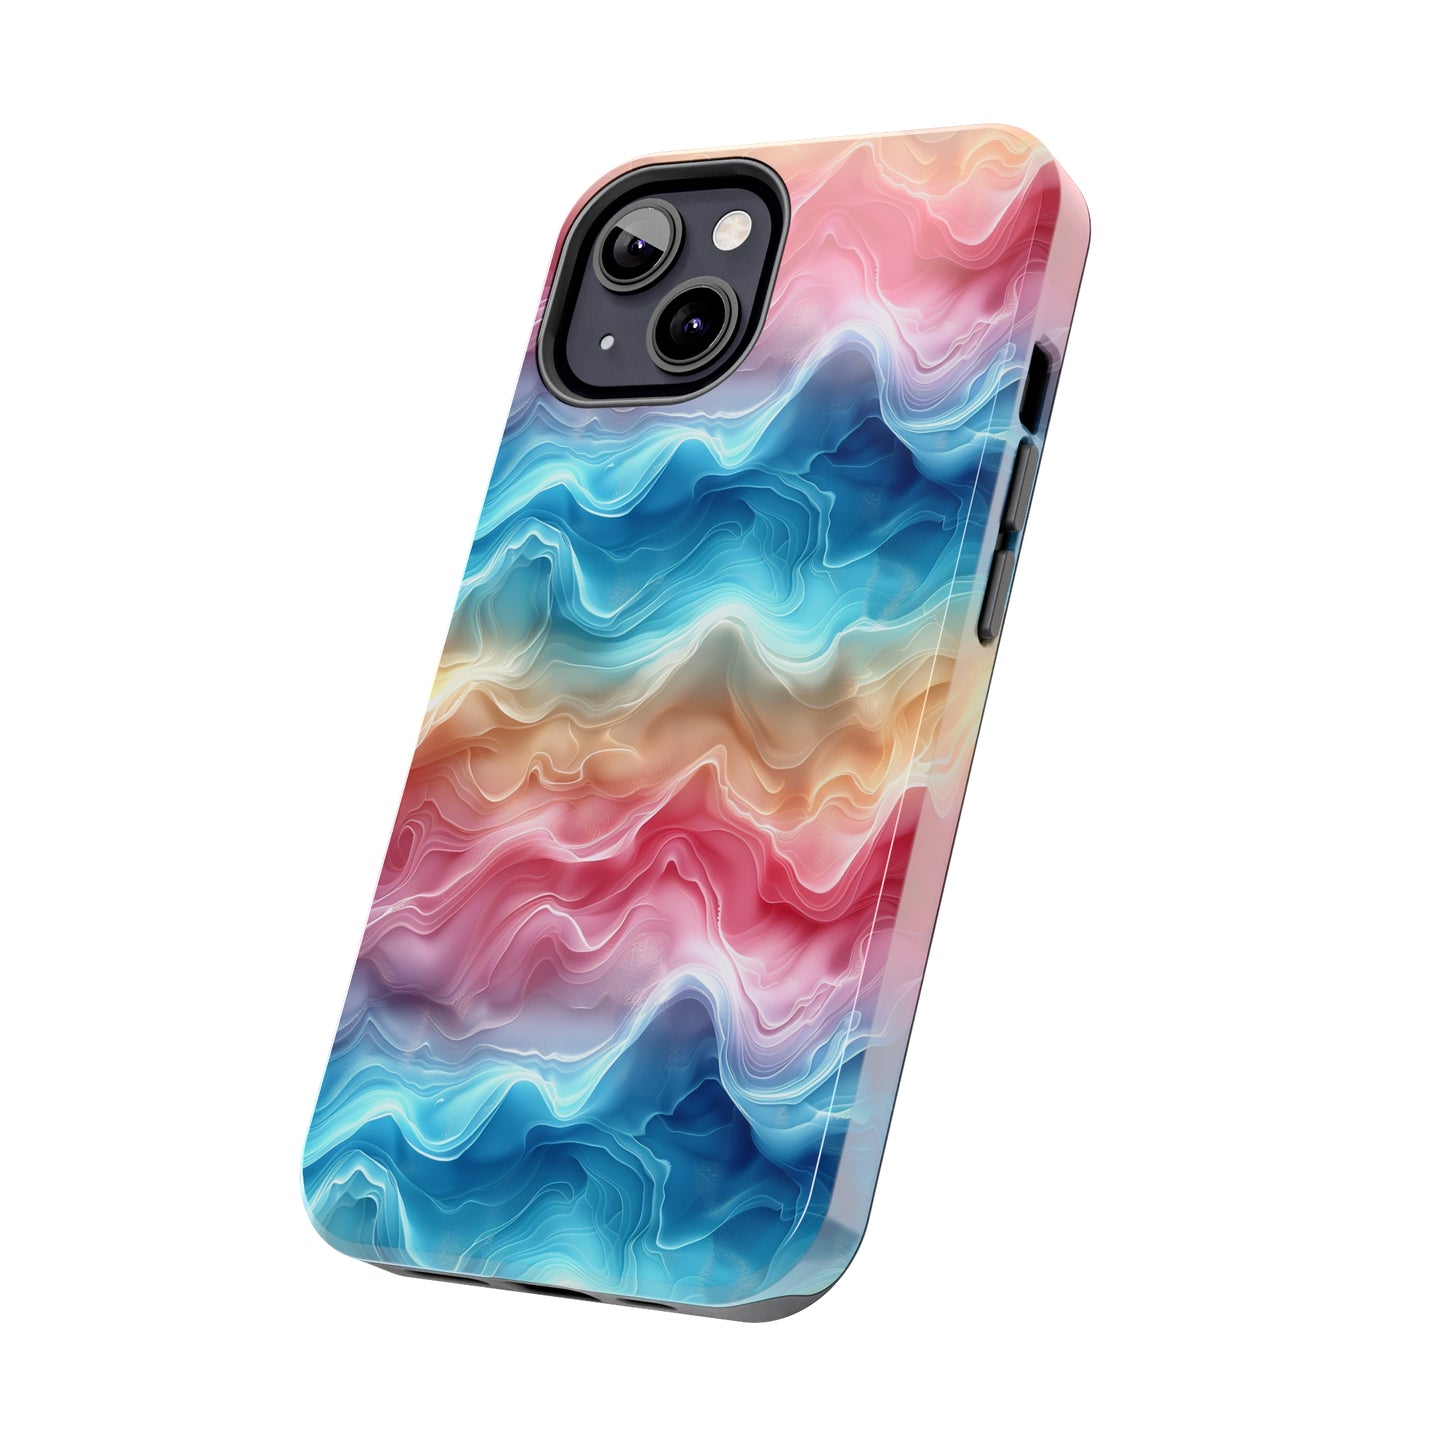 3D pastel waves pattern iPhone Case, Aesthetic Phone Cover, Artsy 3D Design, Protective Phone Cover compatible with a large variety of iPhone models, Phone Case, Gift